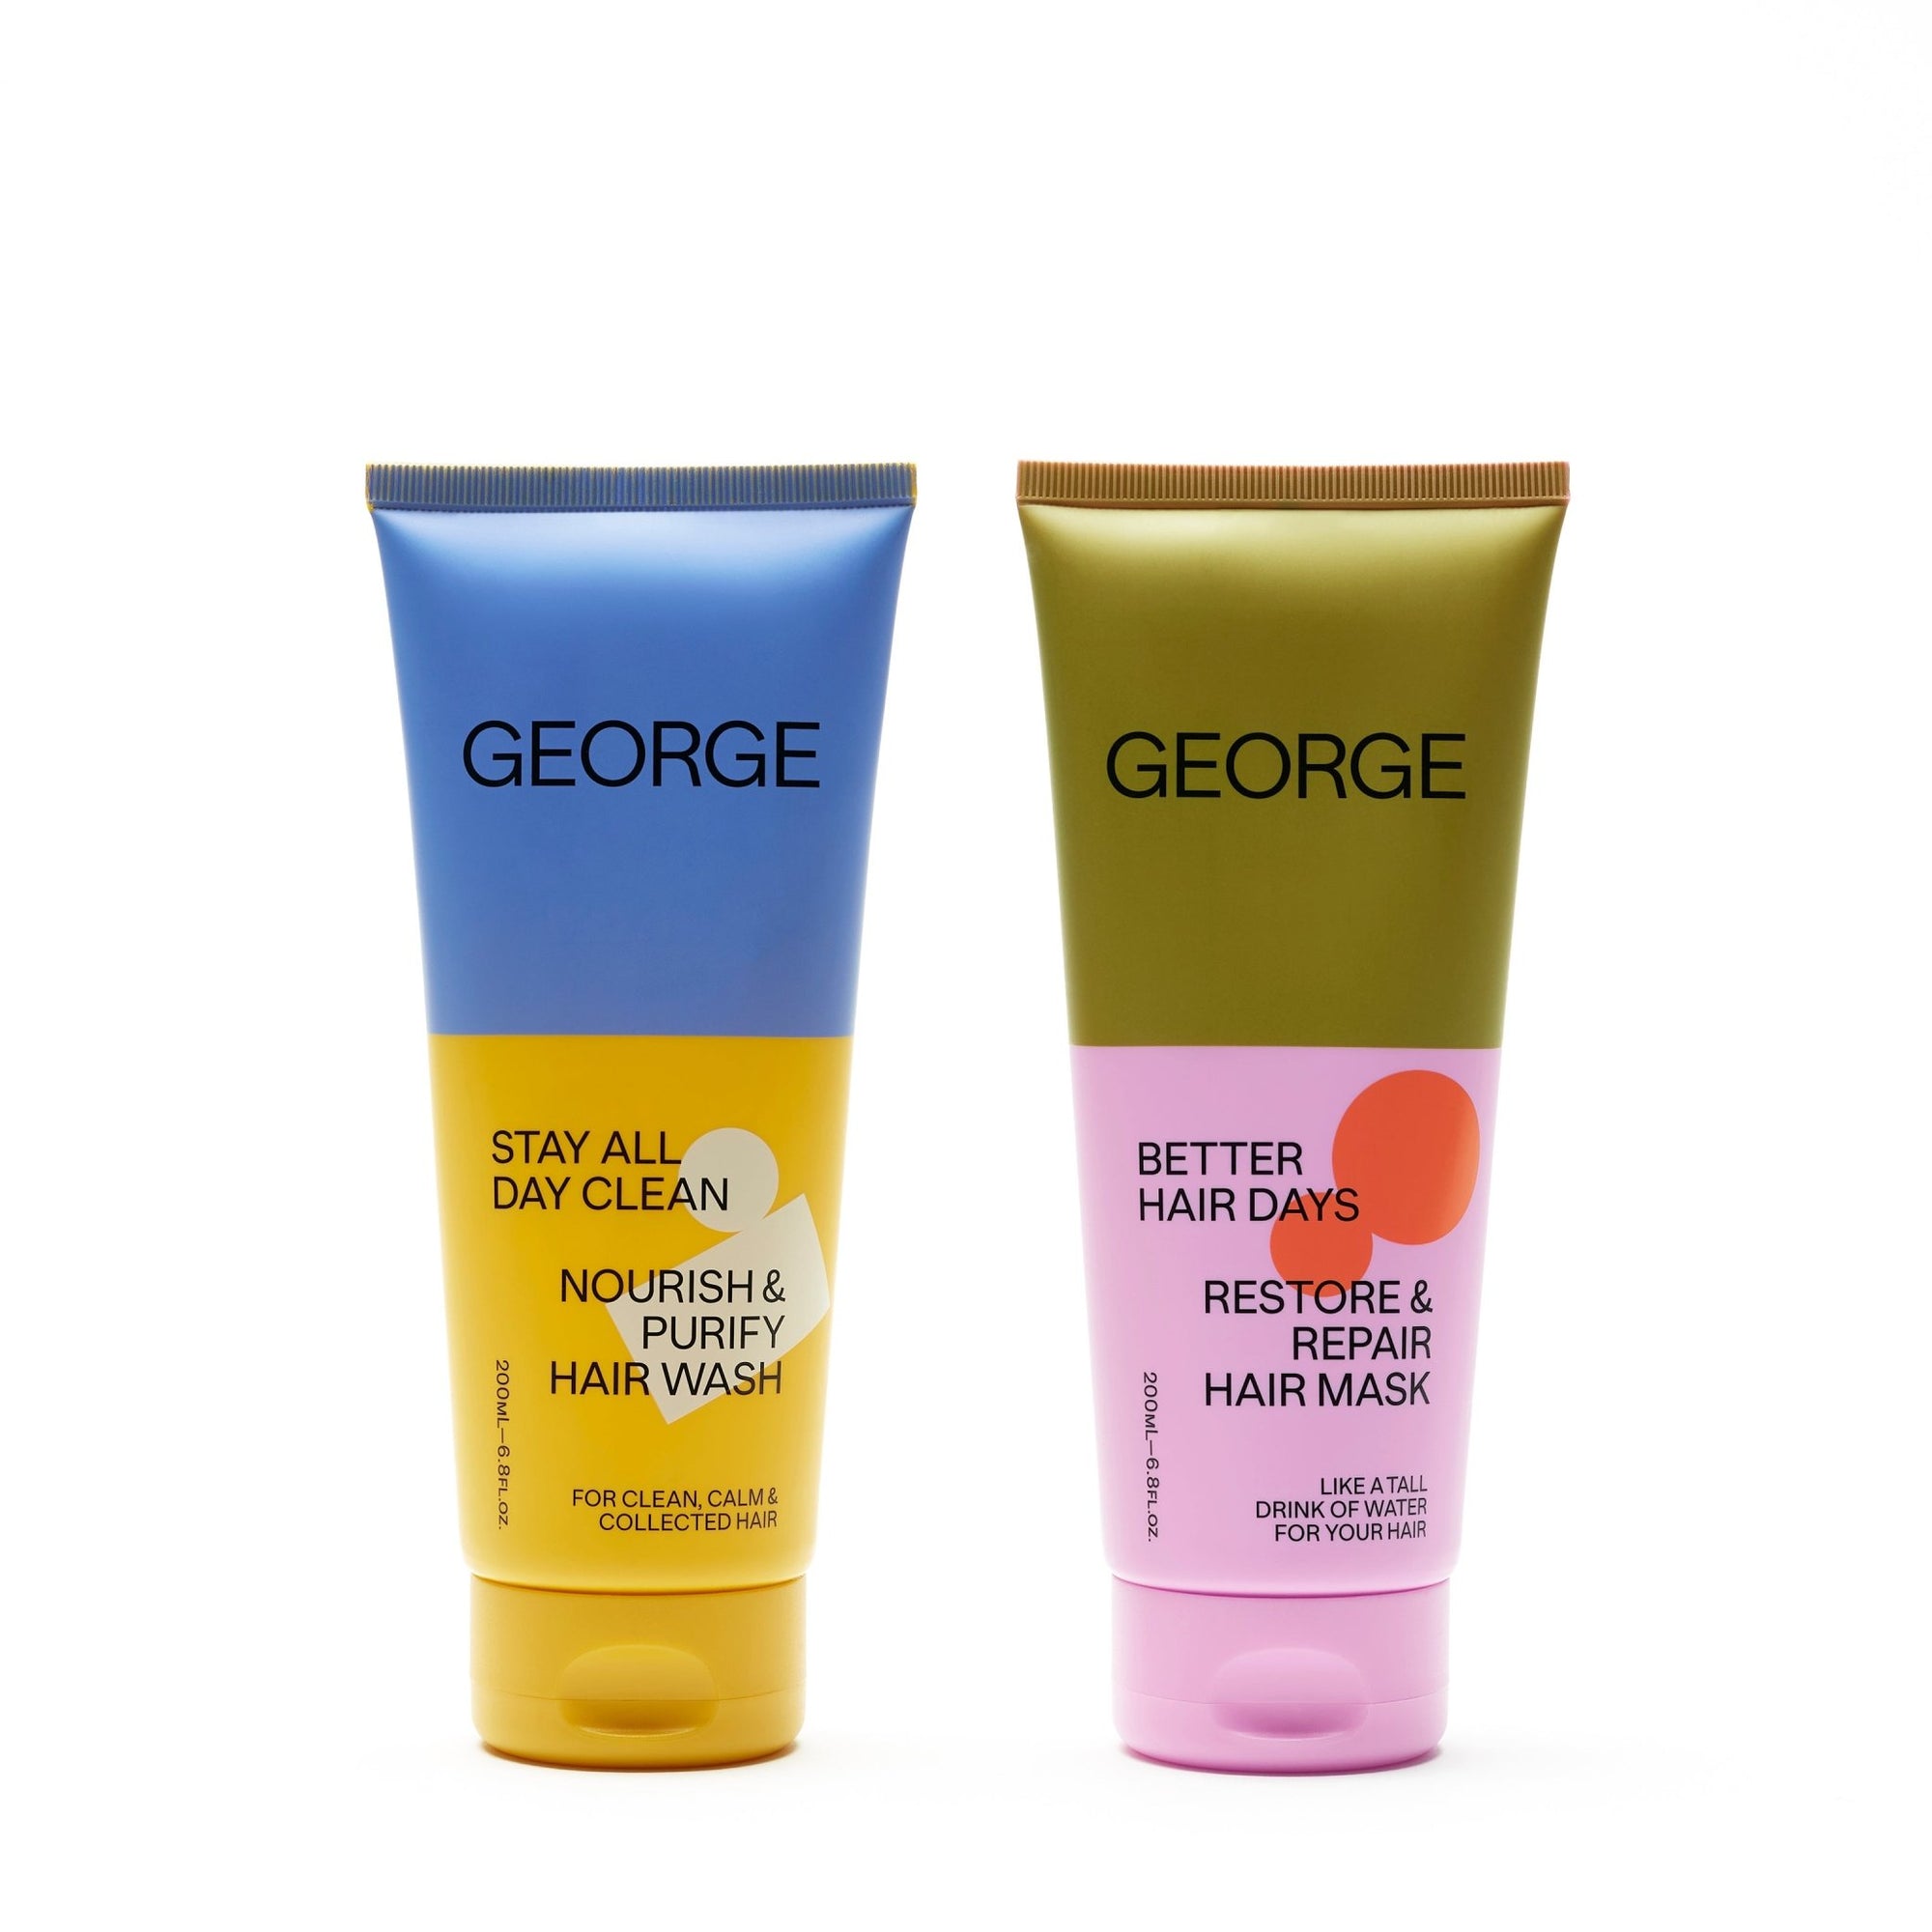 The George Duo Kit - George Haircare